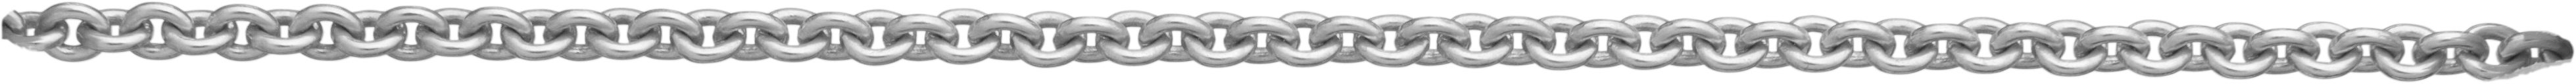 Anchor chain round silver 925/- 1.90mm, wire thickness 0.50mm